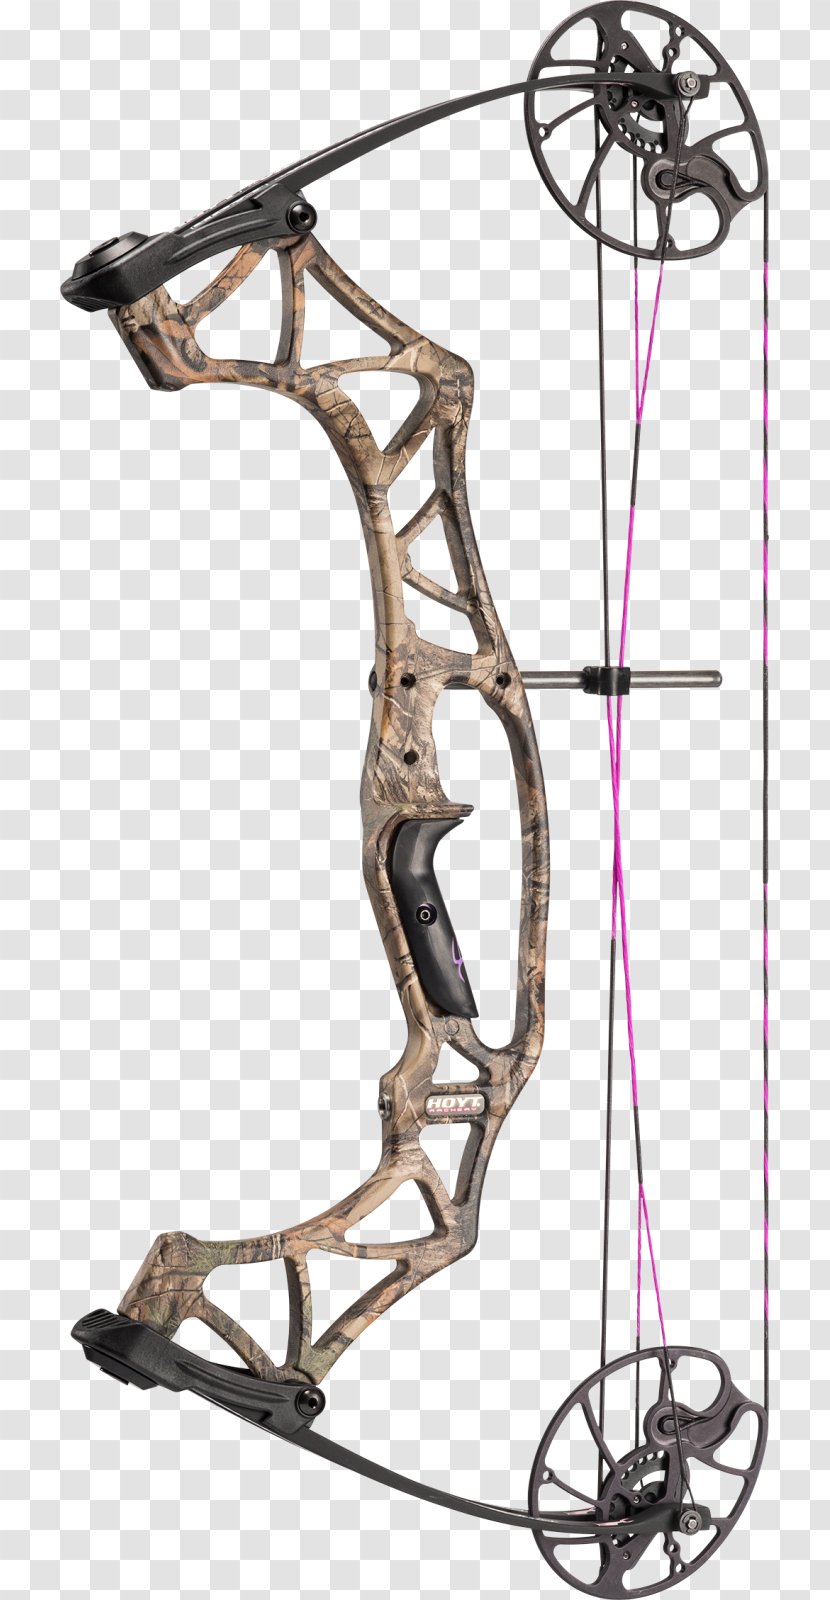 Compound Bows Hoyt Archery Bow And Arrow Bowhunting - World Federation - Kla Kila Transparent PNG